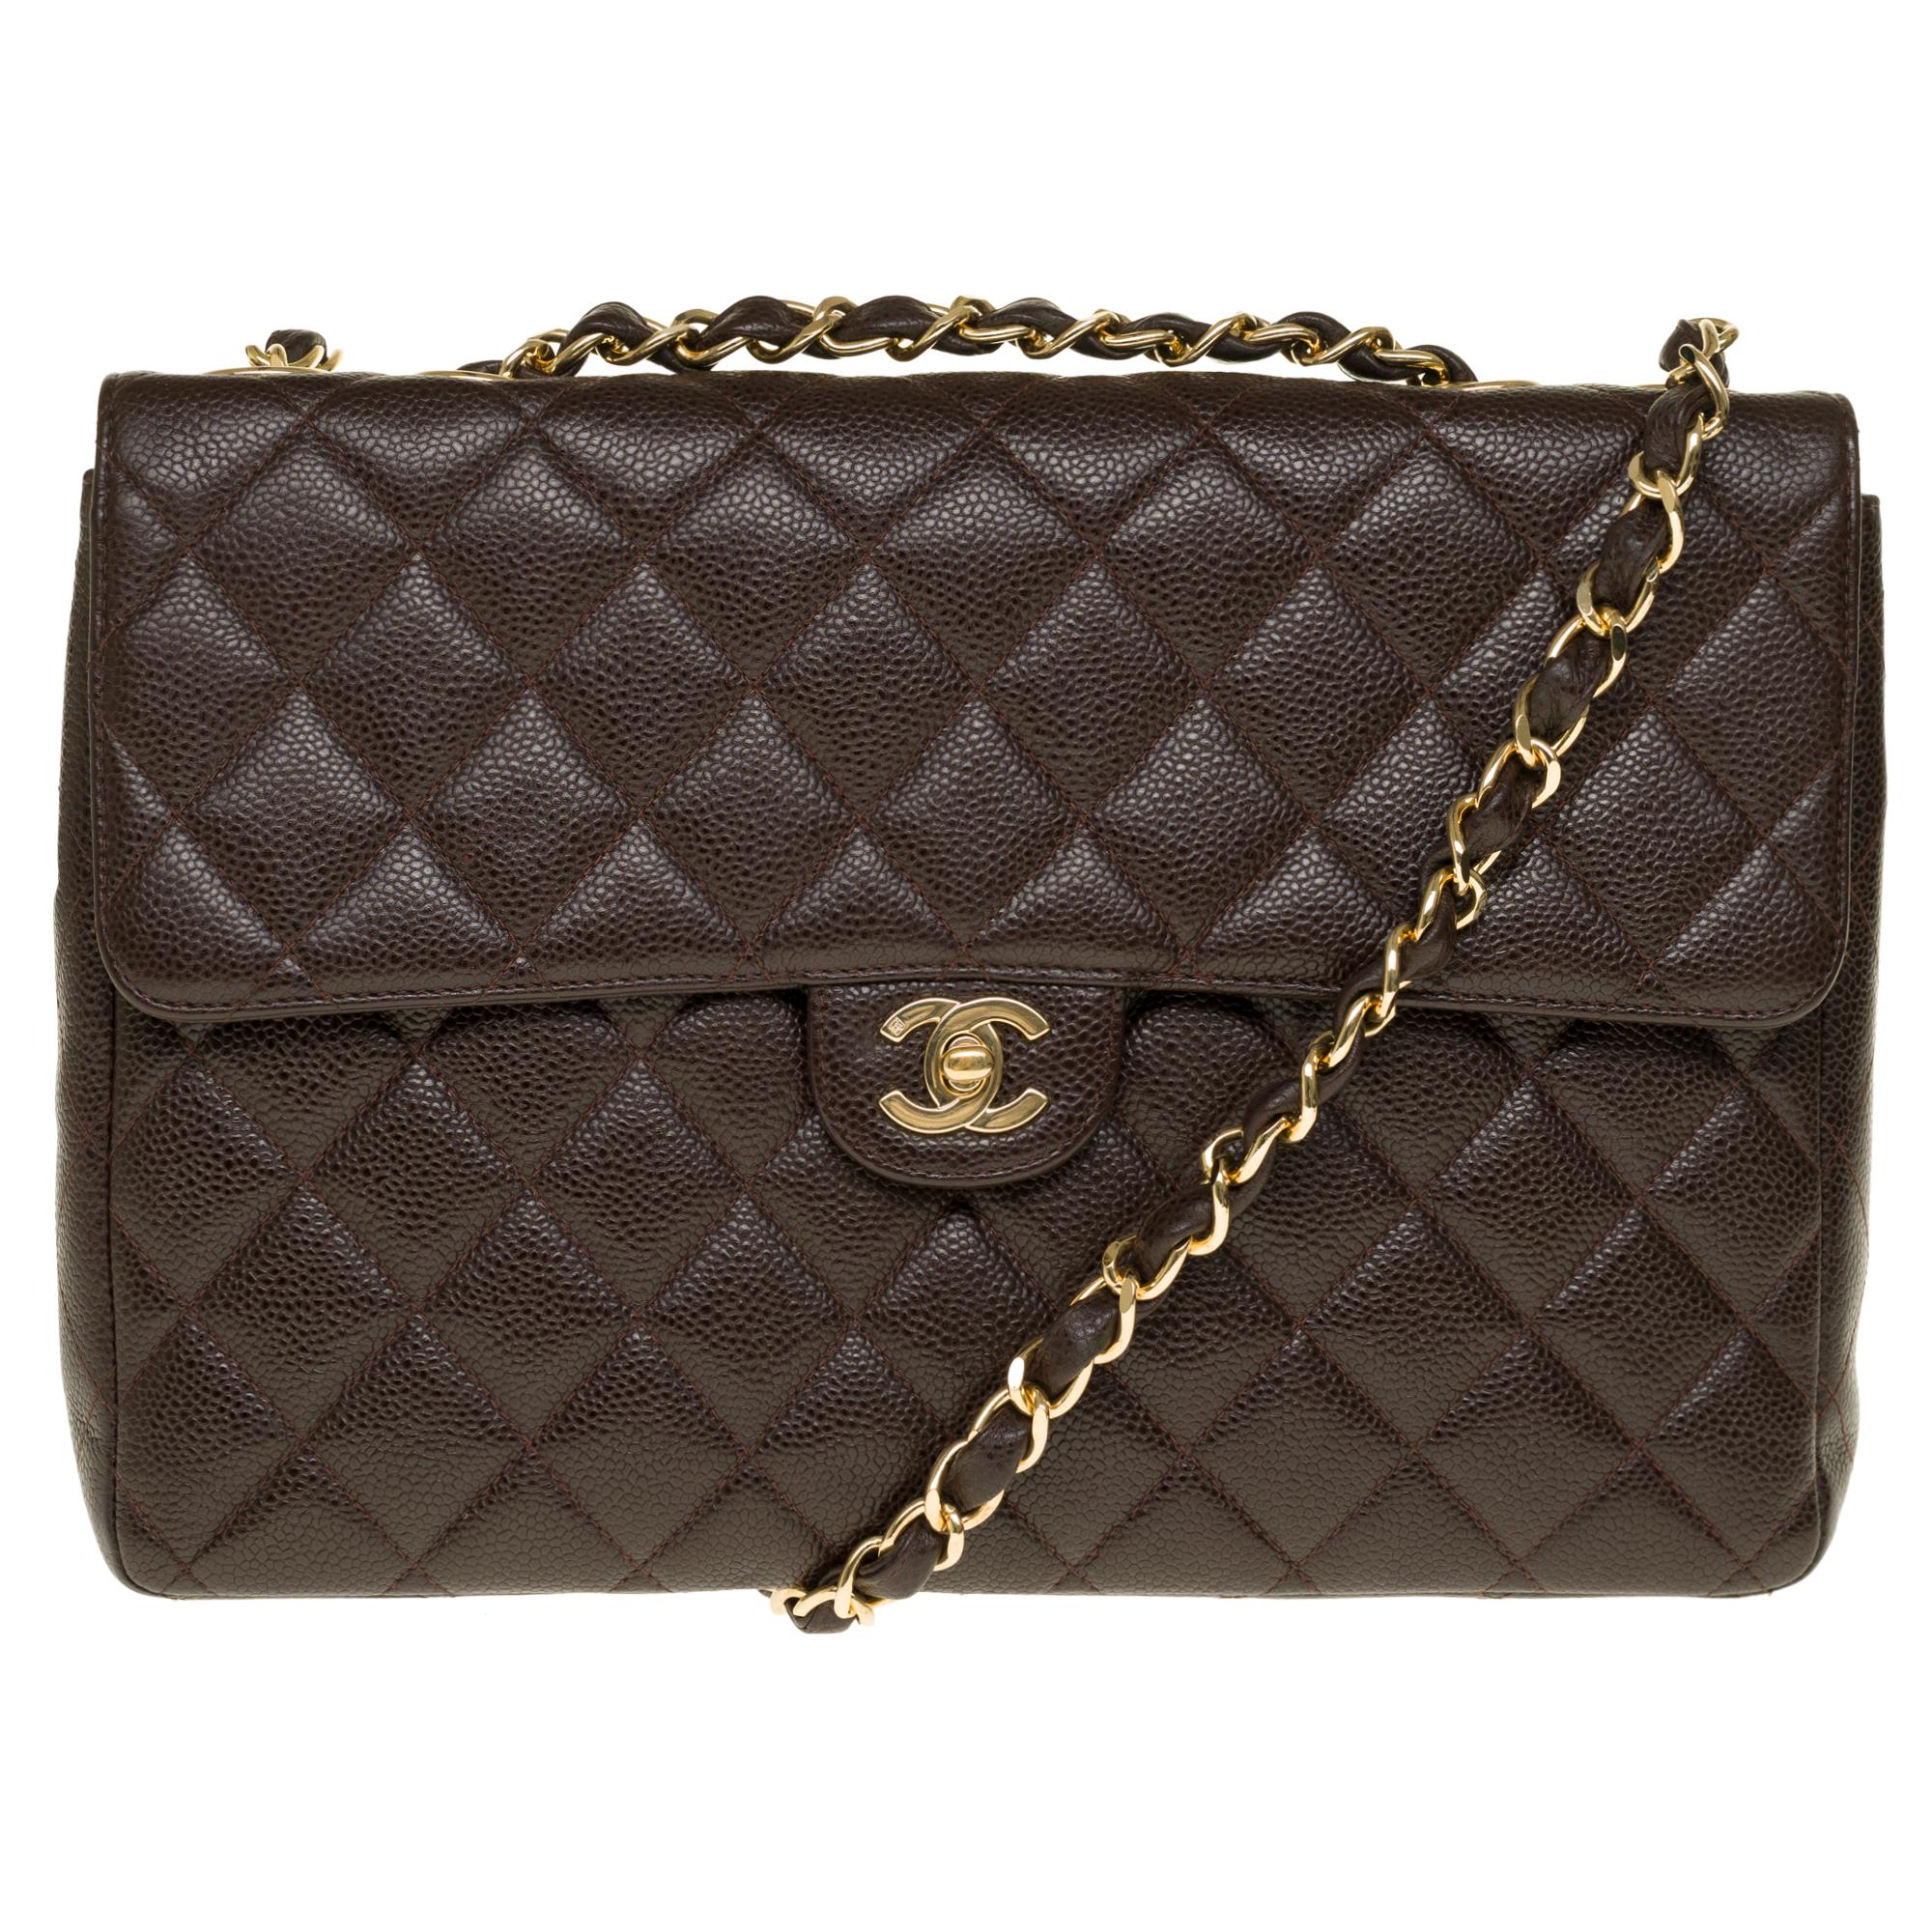 Beautiful Chanel Timeless Jumbo Handbag with simple flap in brown quilted caviar leather, gold metal hardware, a golden metal chain handle (new) intertwined with brown leather allowing a hand or shoulder or shoulder strap.

Closure with gold metal